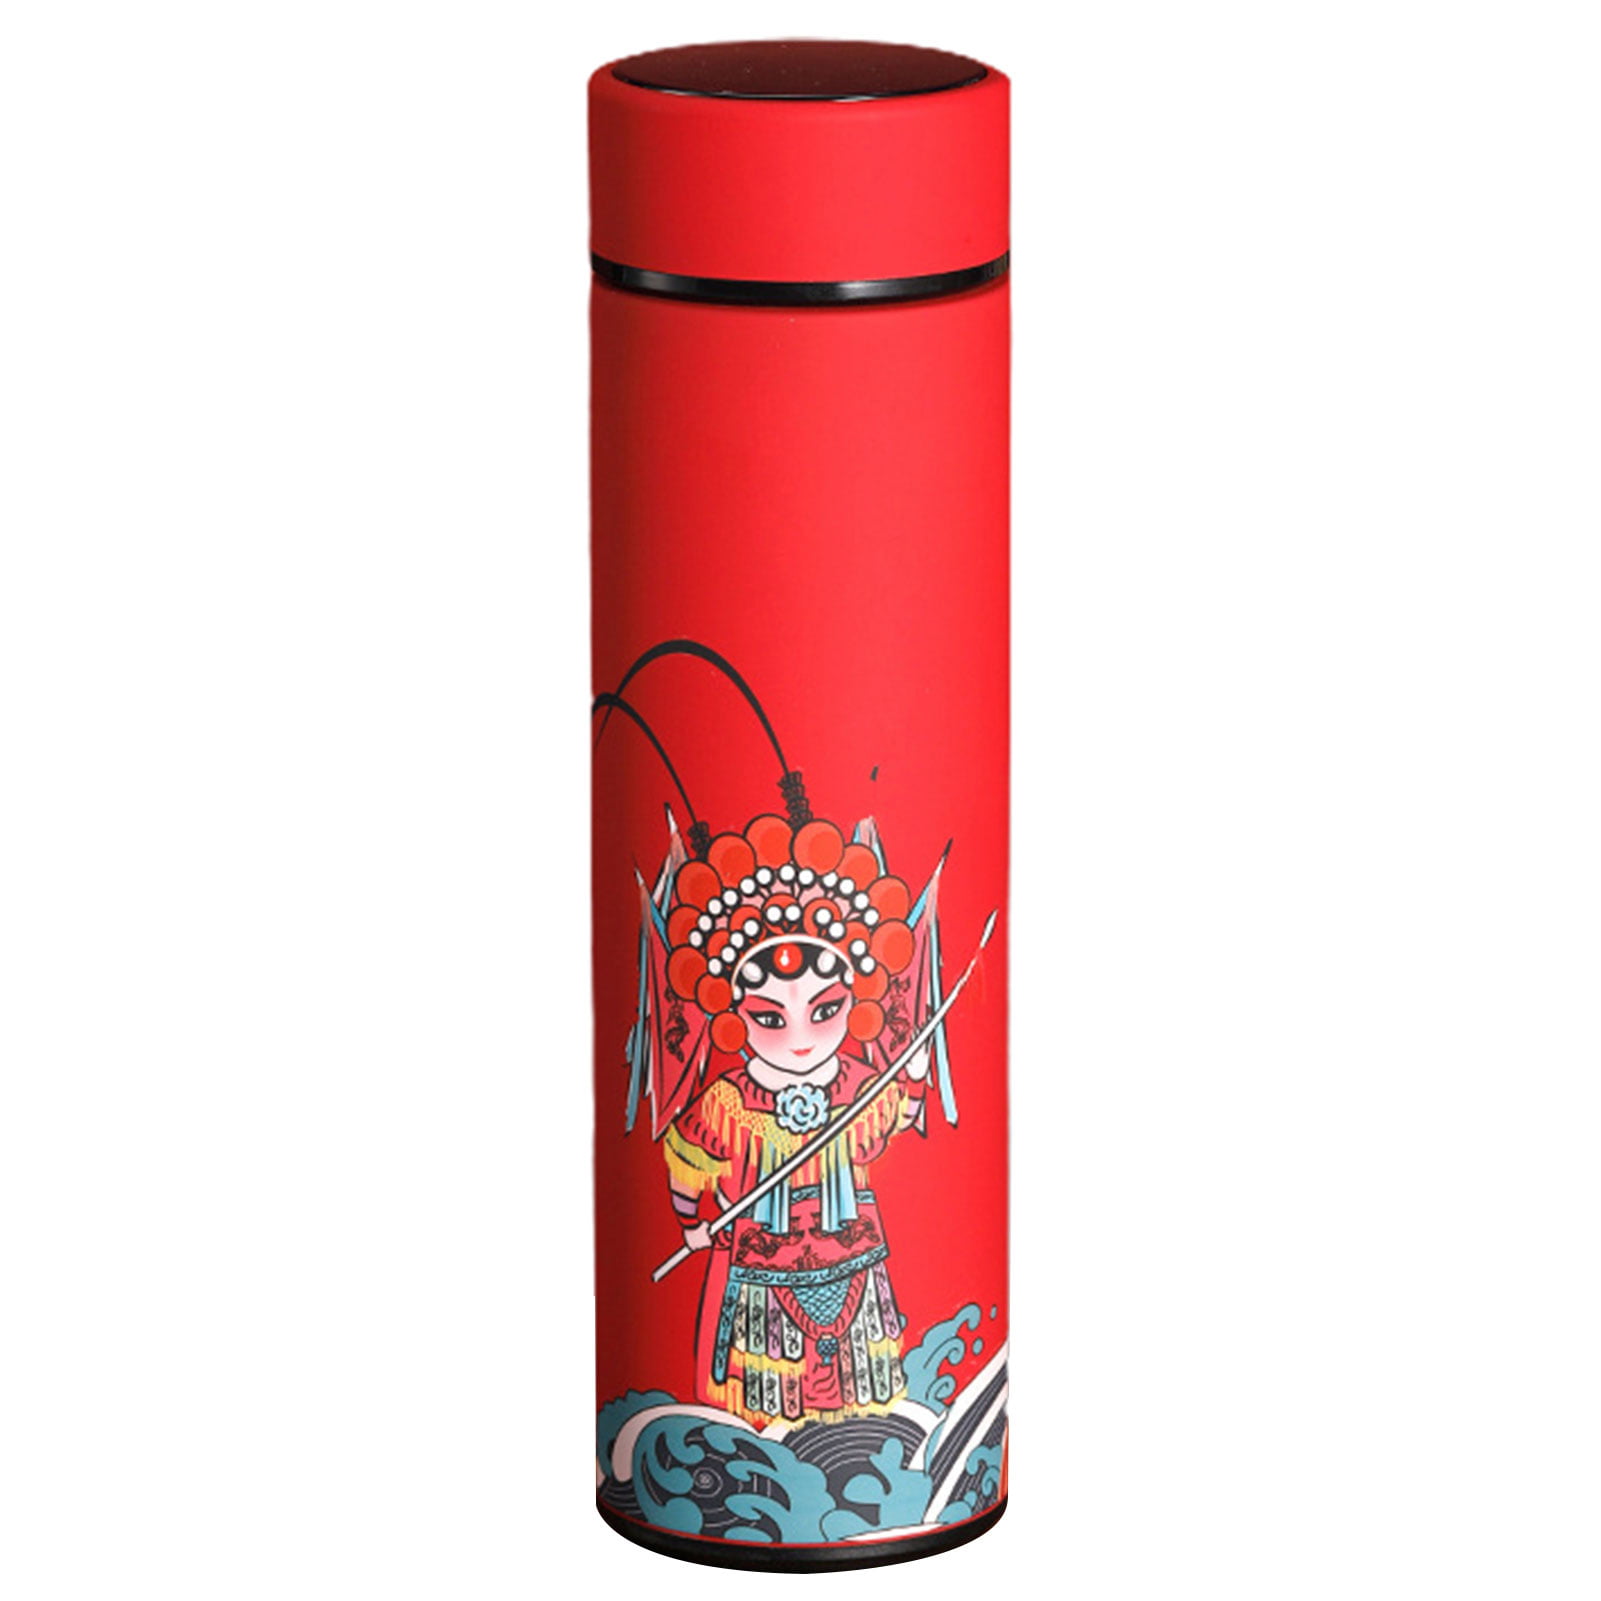 Lihangrui 500ML Portable Vacuum Insulated Stainless Steel Drinking Bullet  Water Bottle With Handle - Buy Lihangrui 500ML Portable Vacuum Insulated  Stainless Steel Drinking Bullet Water Bottle With Handle Product on